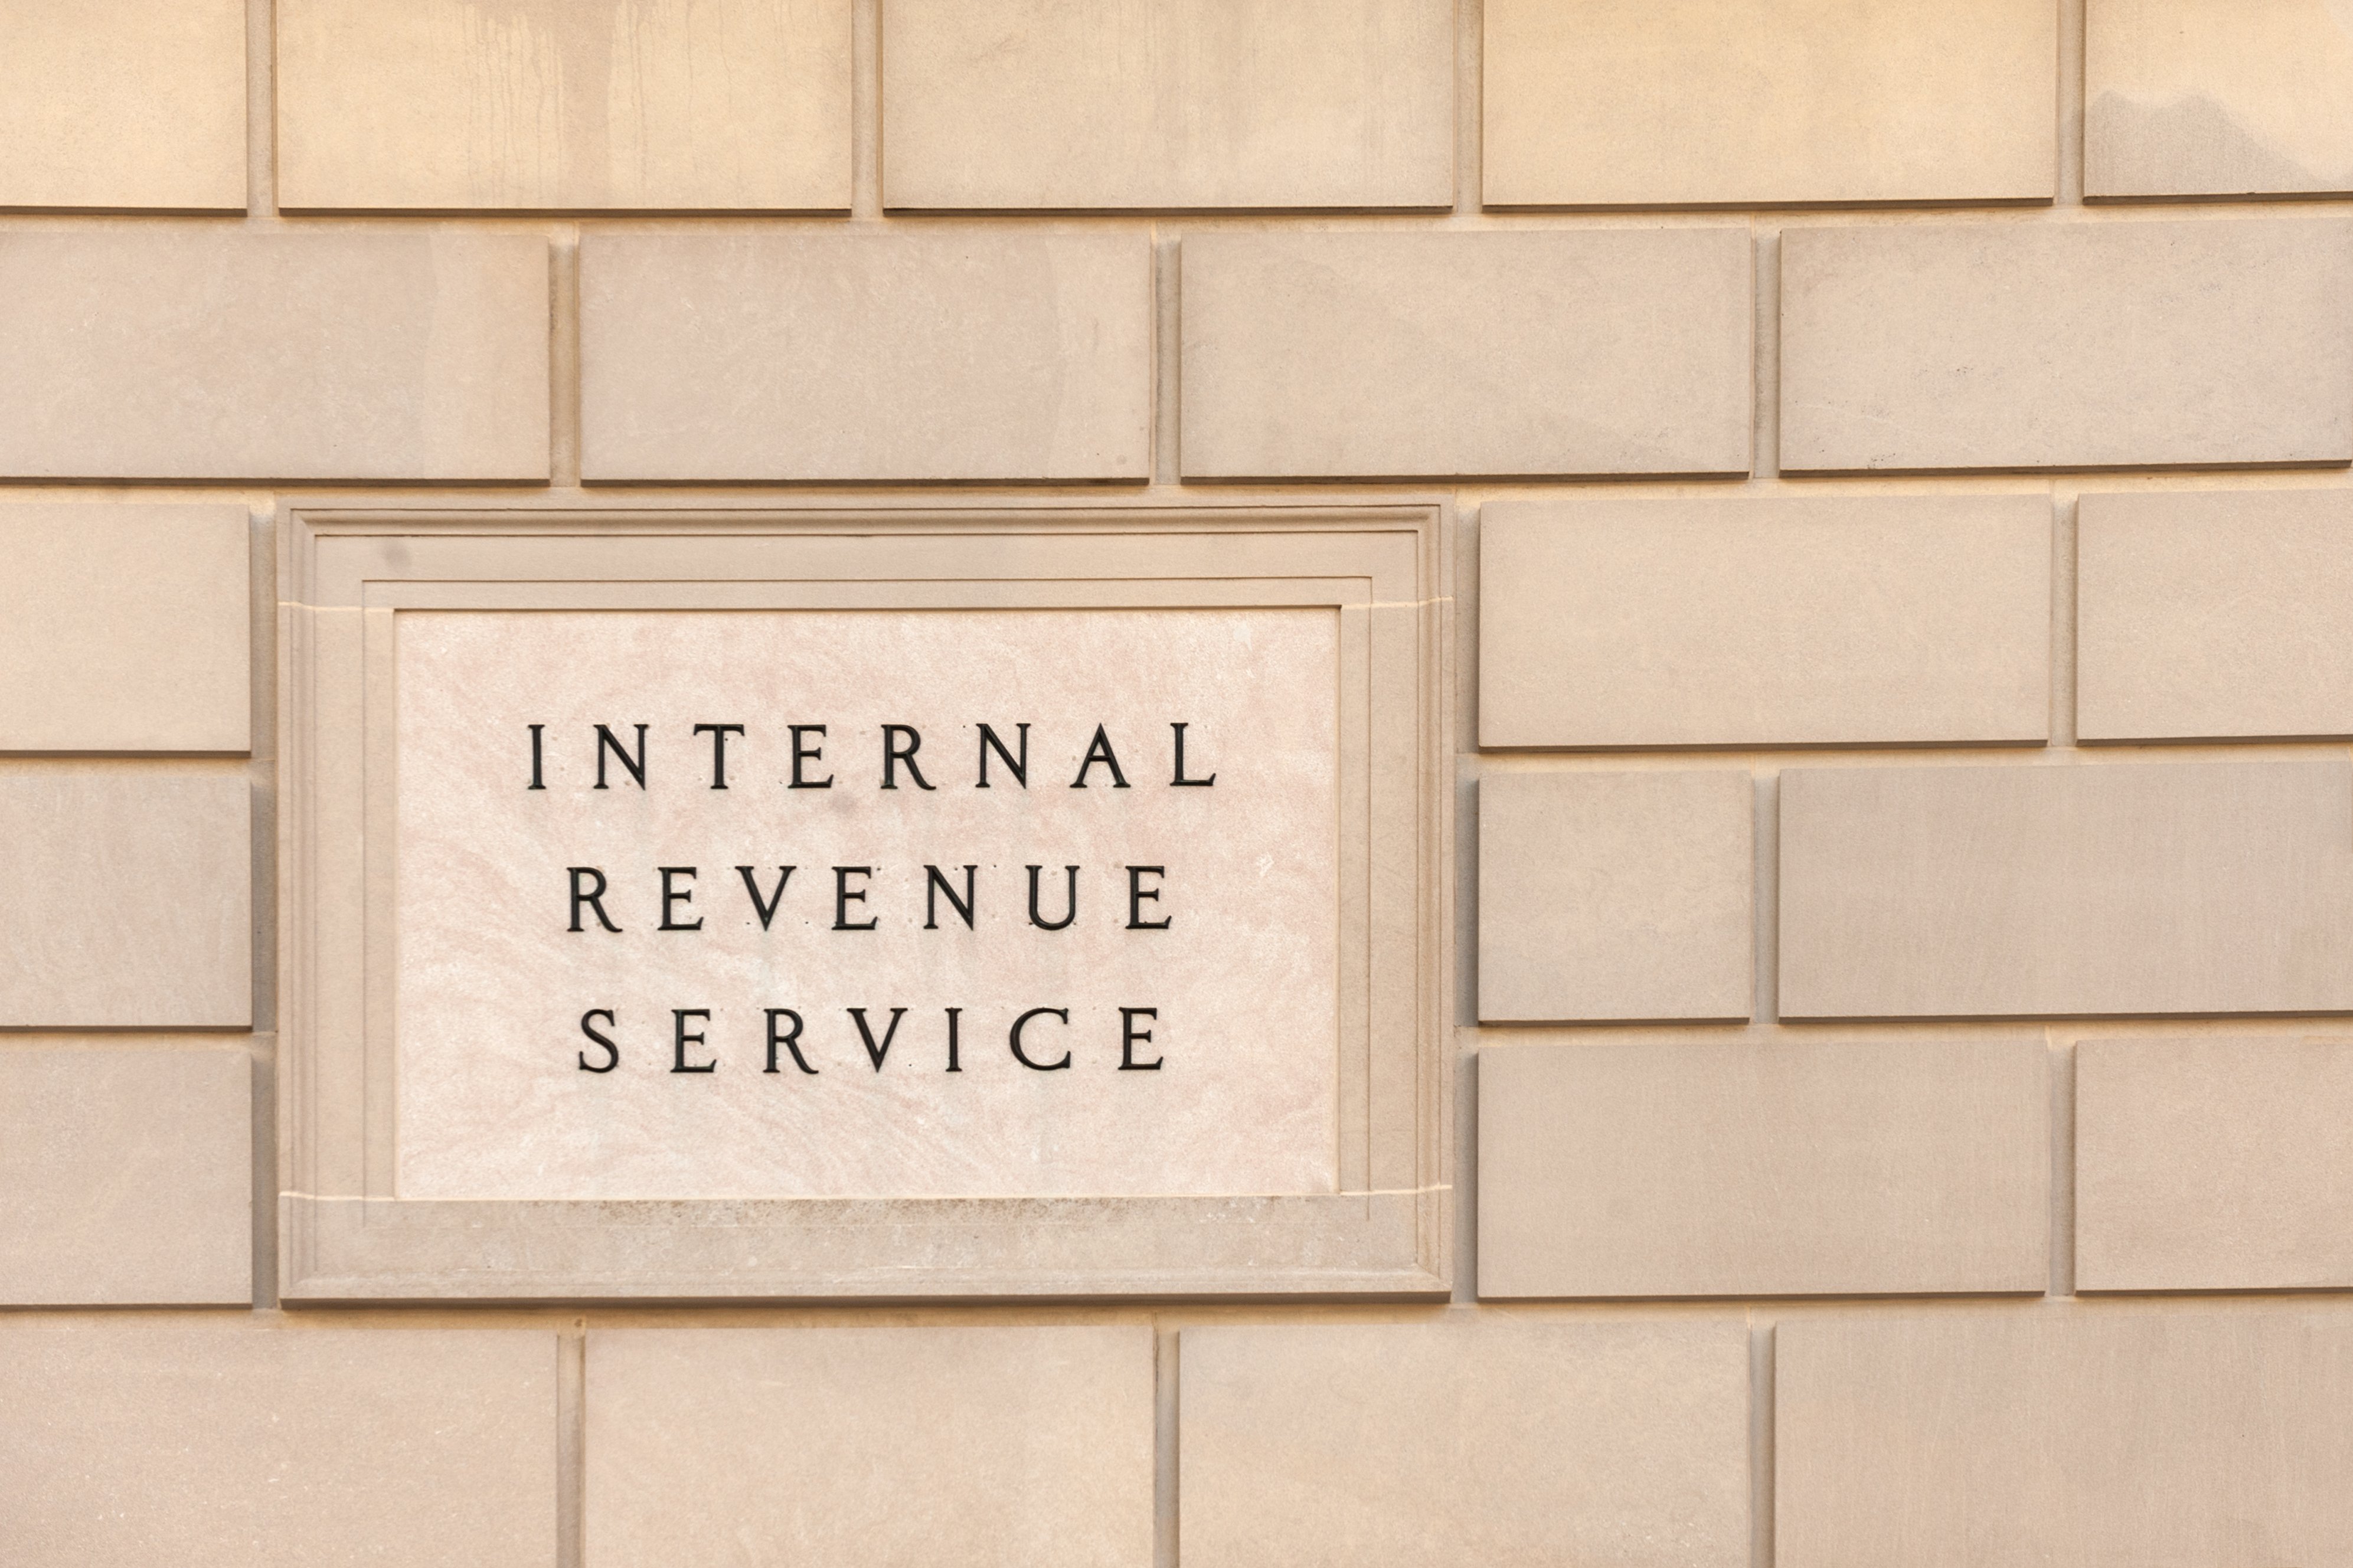 IRS Announces HSA, FSA, HDHP Contribution and OOP Limits for 2022